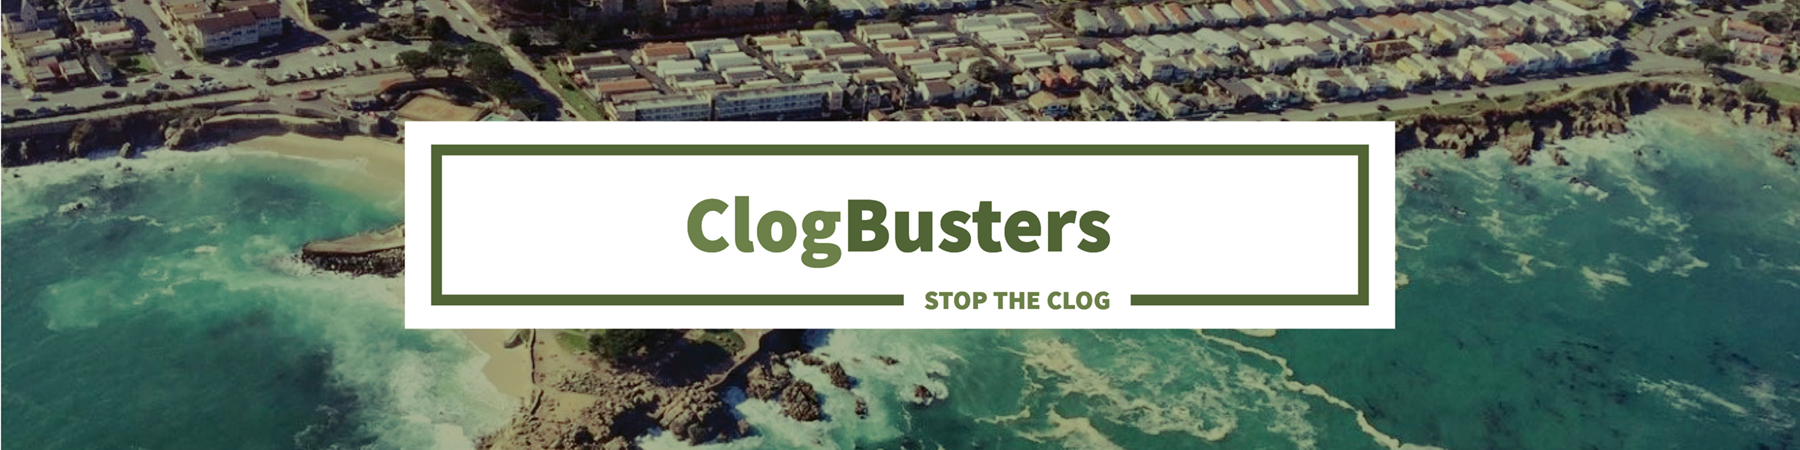 ClogBusters